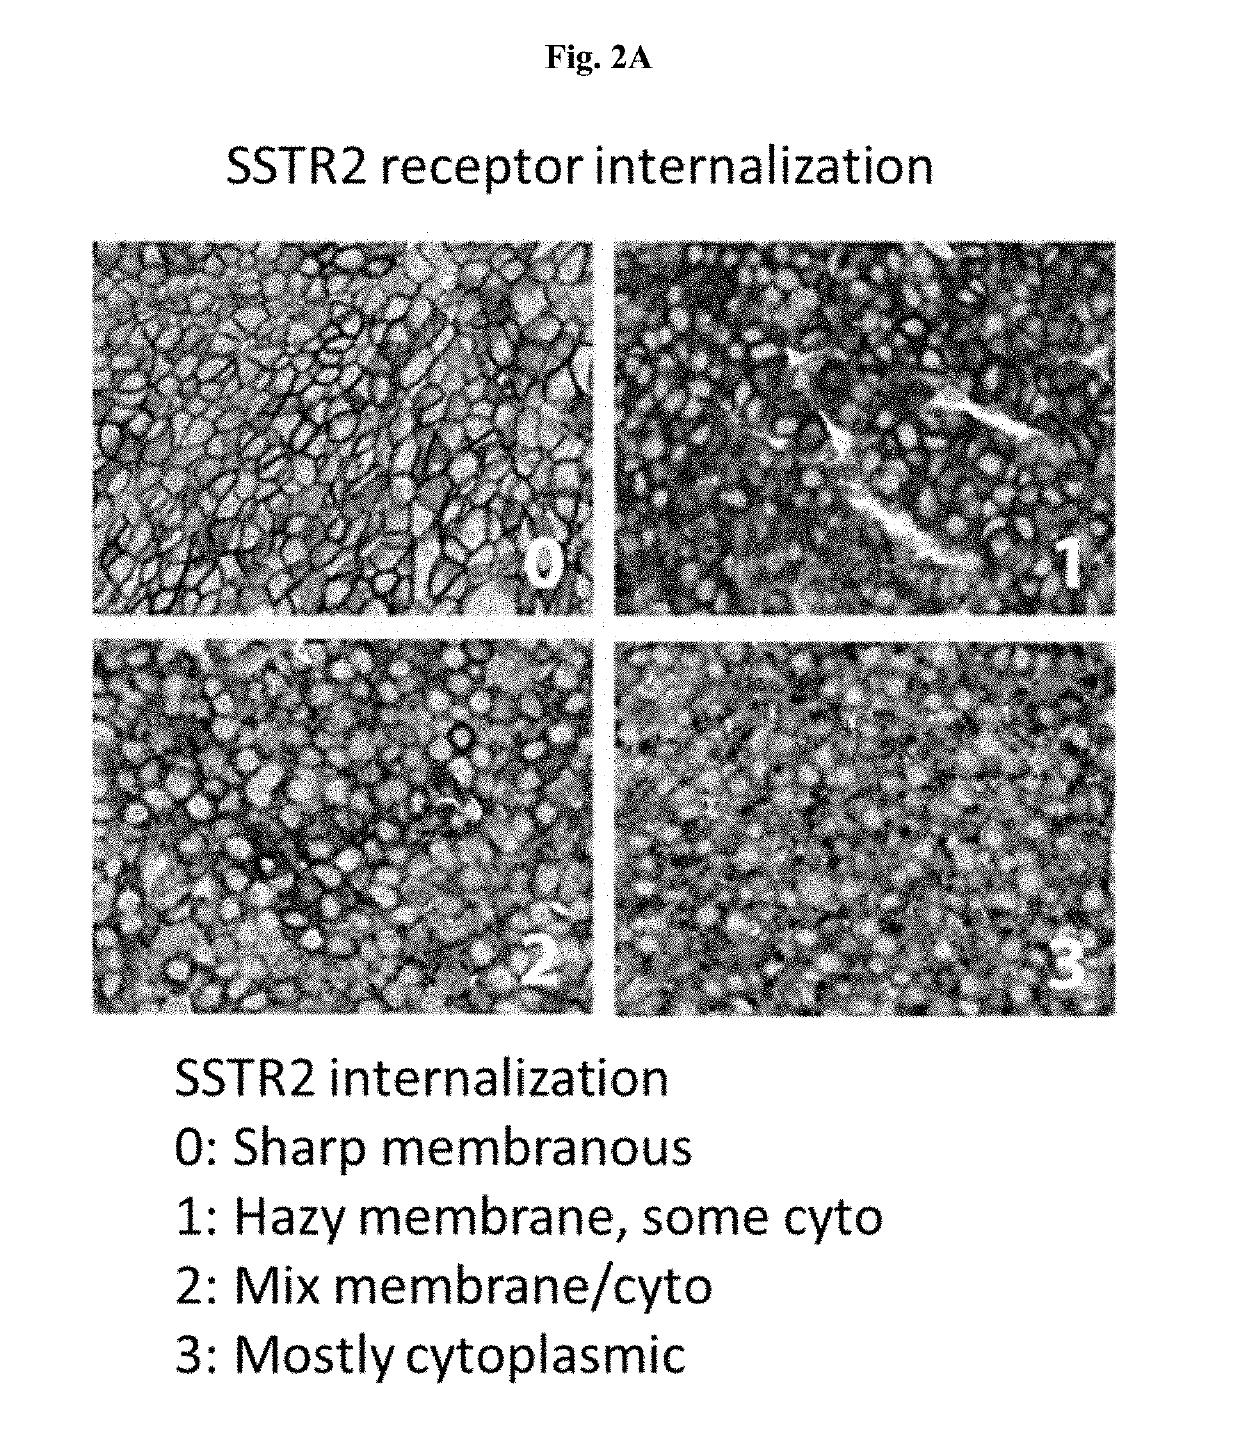 Sstr-targeted conjugates and particles and formulations thereof